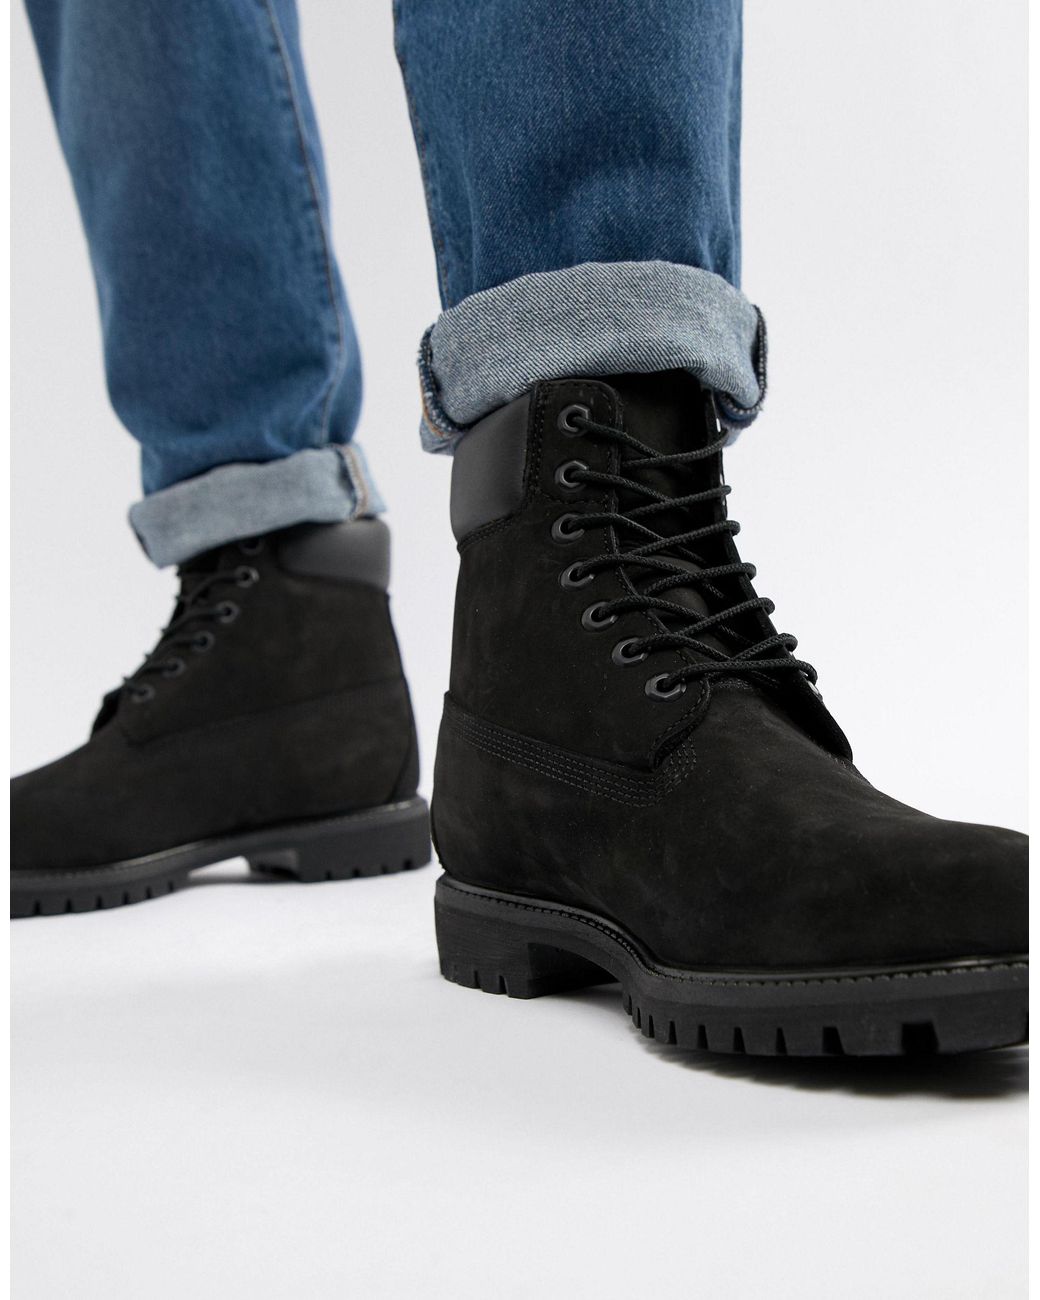 Timberland Clasicas Discounts Offers, 67% OFF | himlamcorp.vn